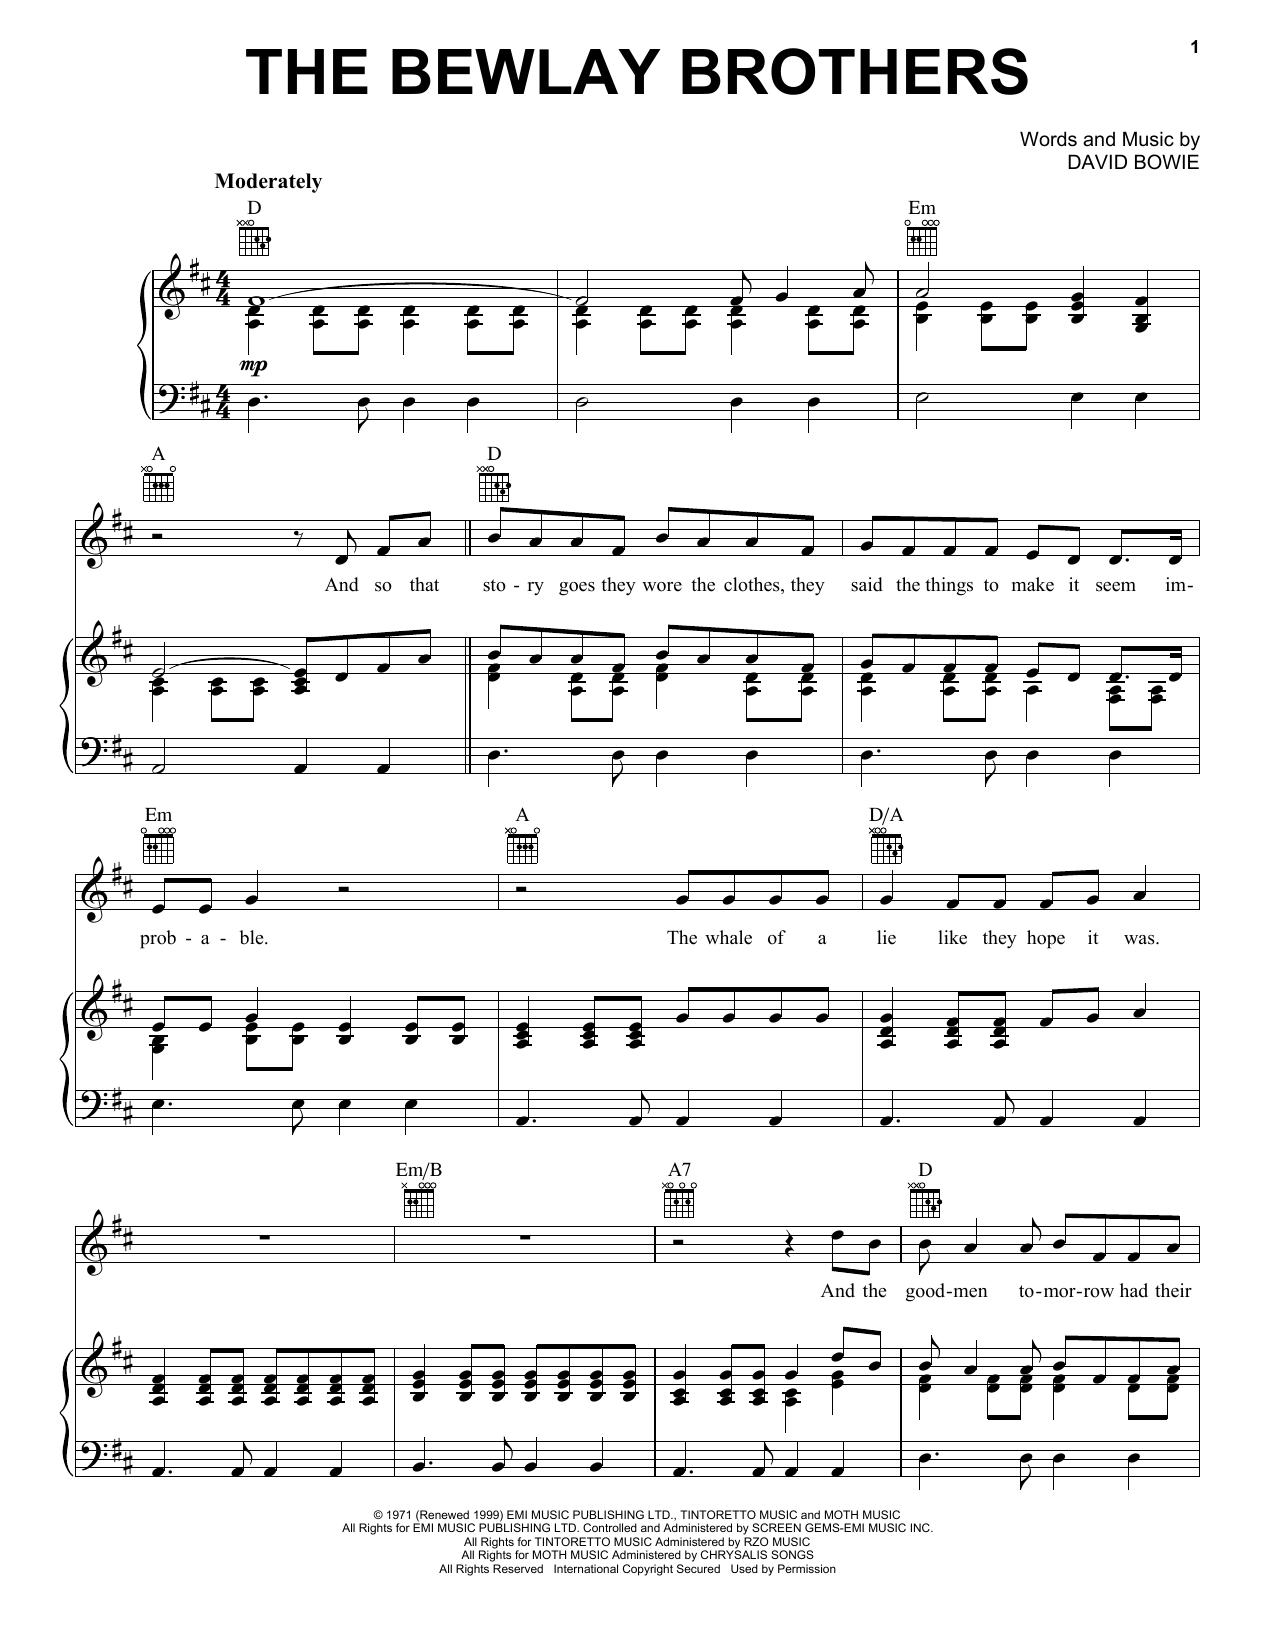 Download David Bowie The Bewlay Brothers Sheet Music